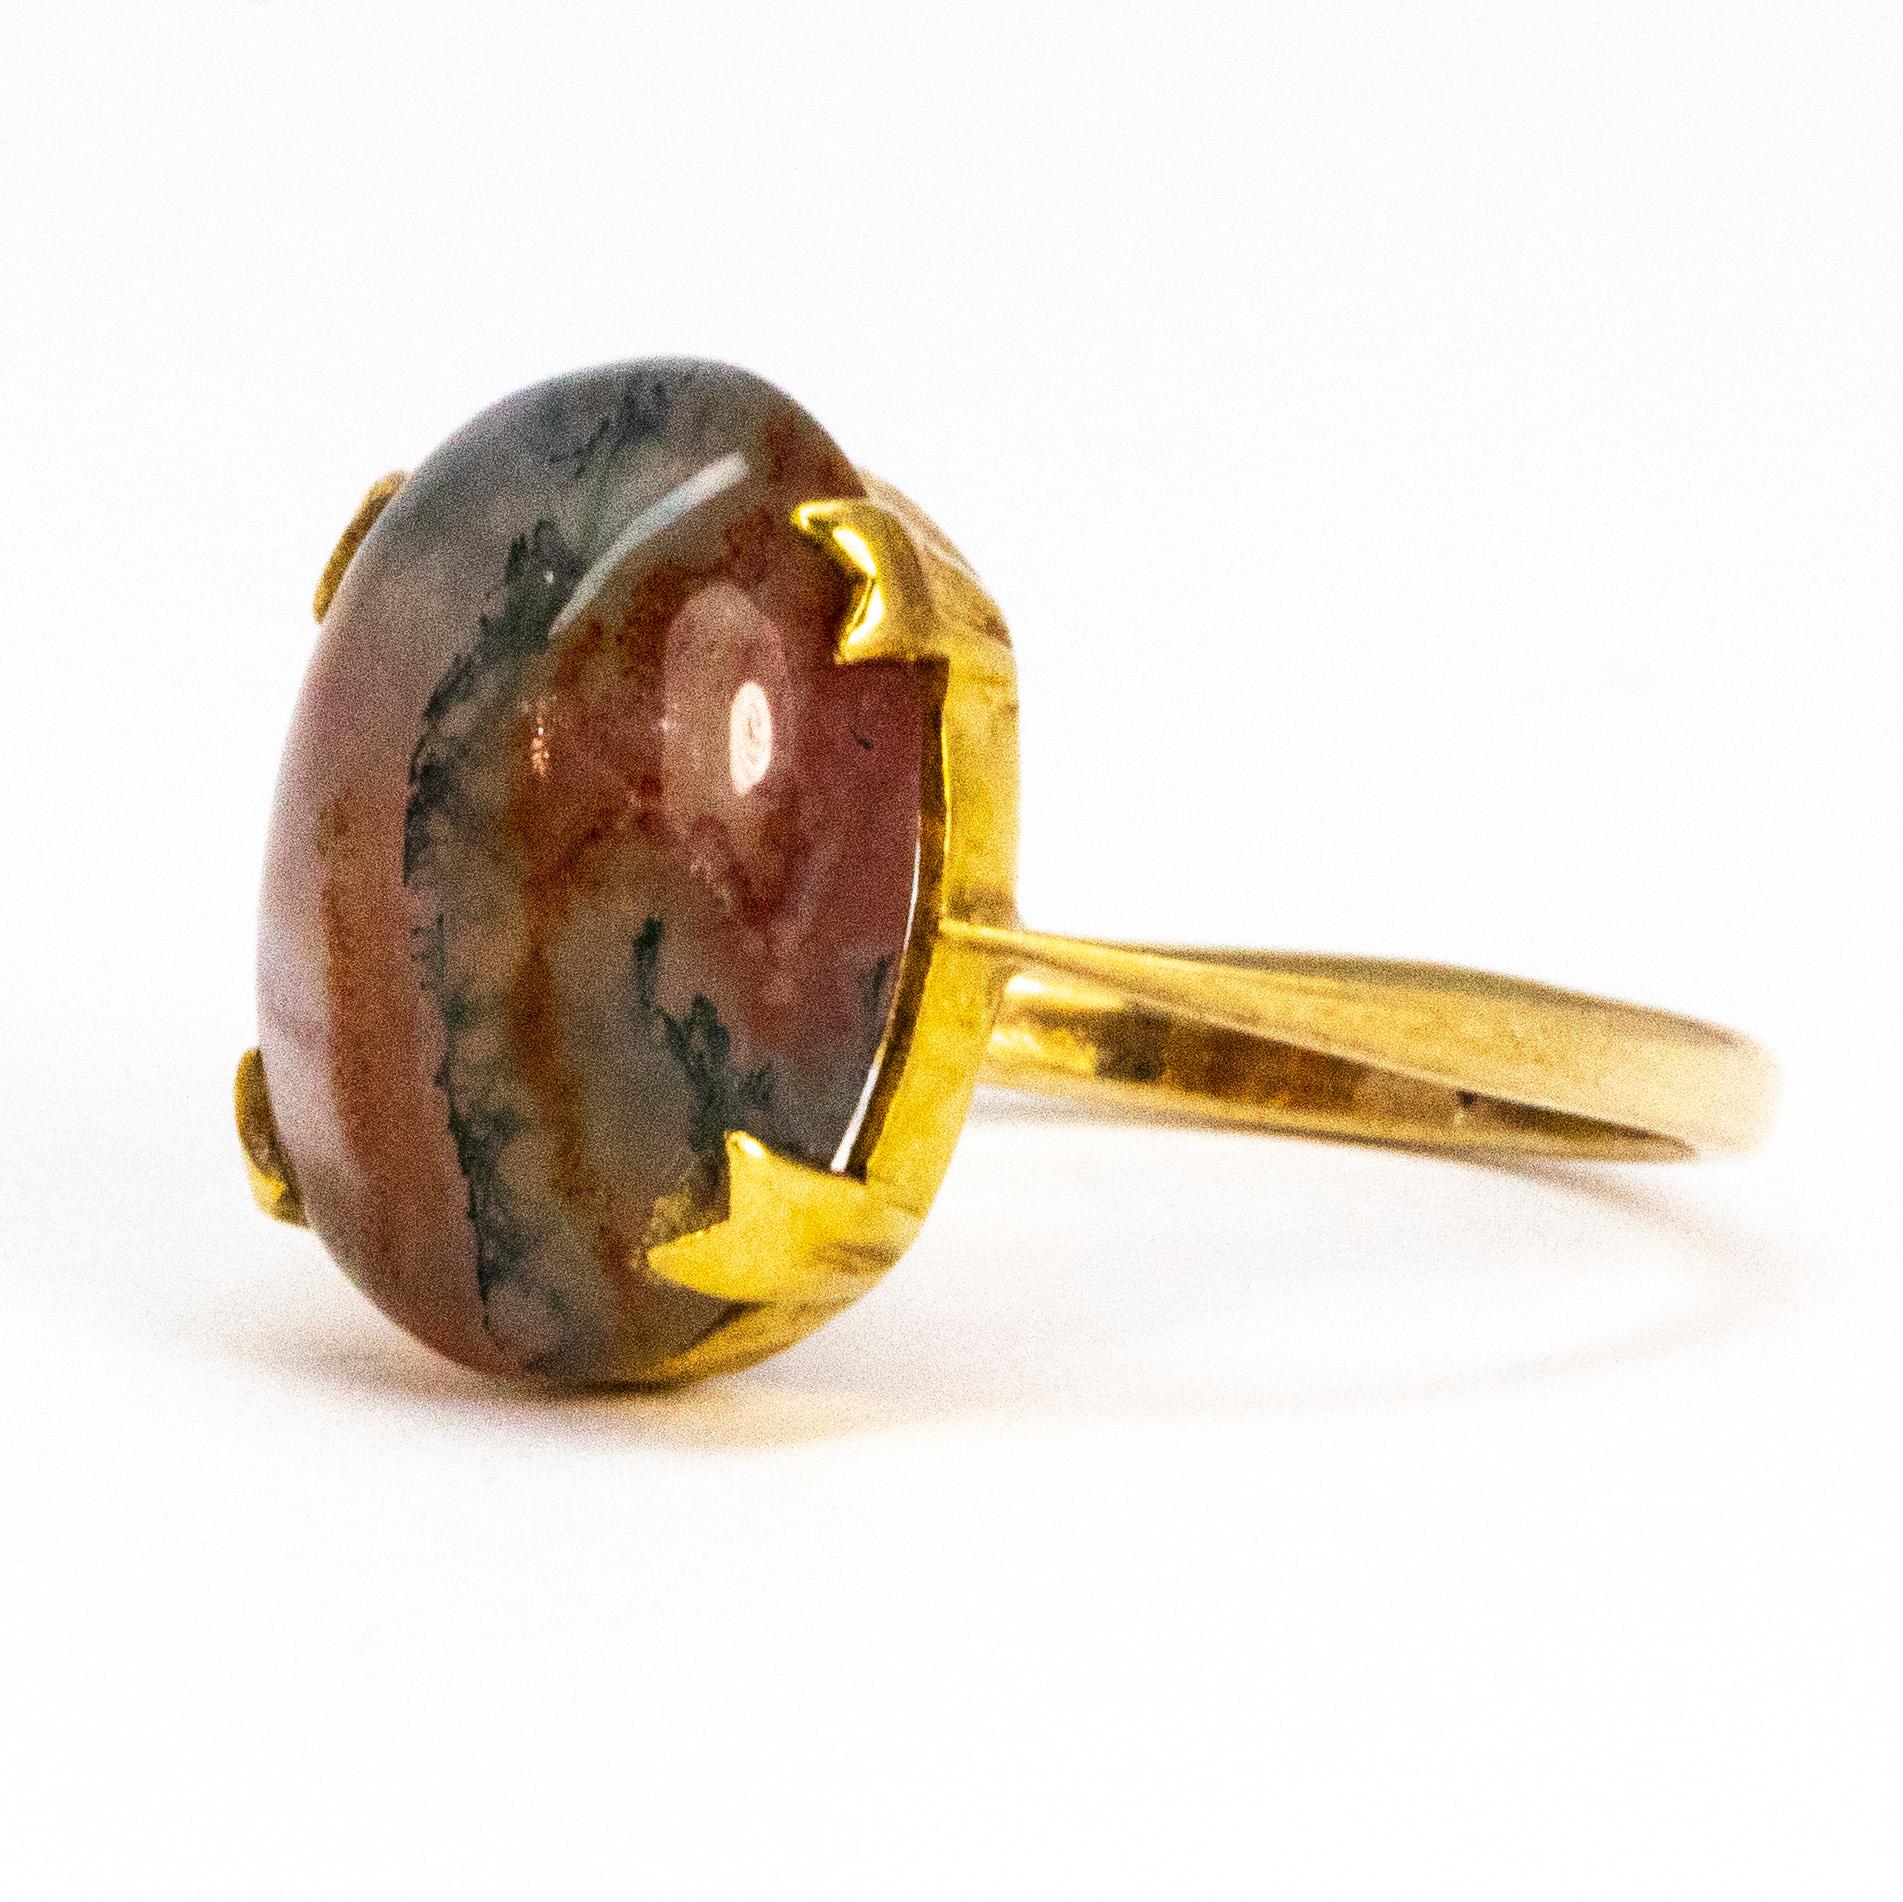 The gorgeously glossy cabochon agate stone in this ring has so many beautiful colours flowing through it. The stone is set using simple claws and the band is fine and delicate, modelled in 9ct gold. 

Ring Size: L 1/2 or 6
Stone Dimensions: 14.5mm x